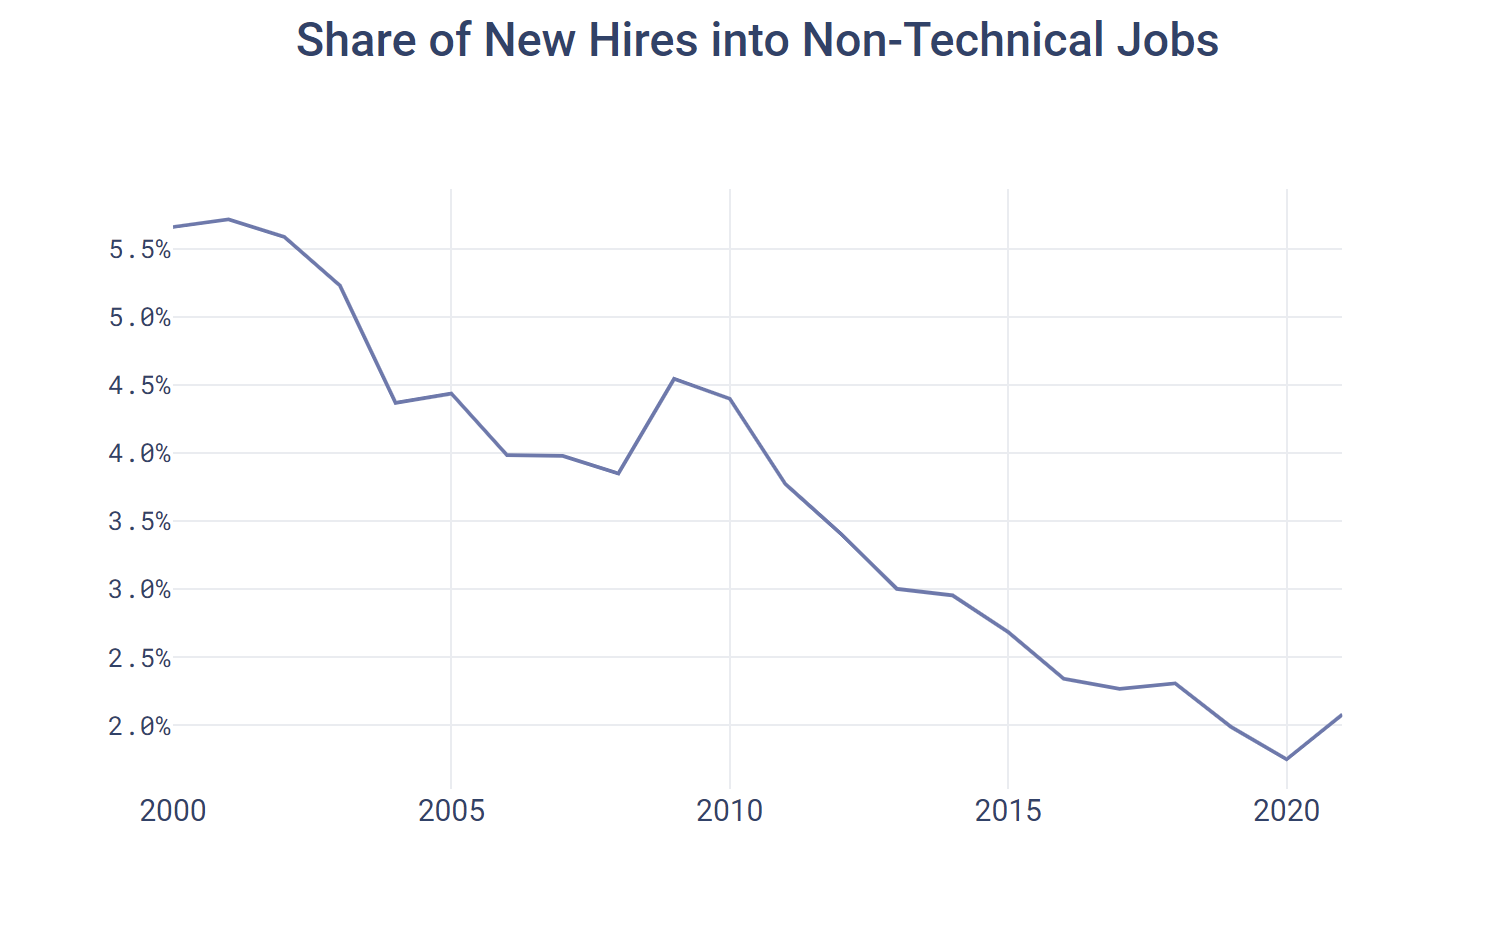 Share of New Hires into Non-Technical Jobs